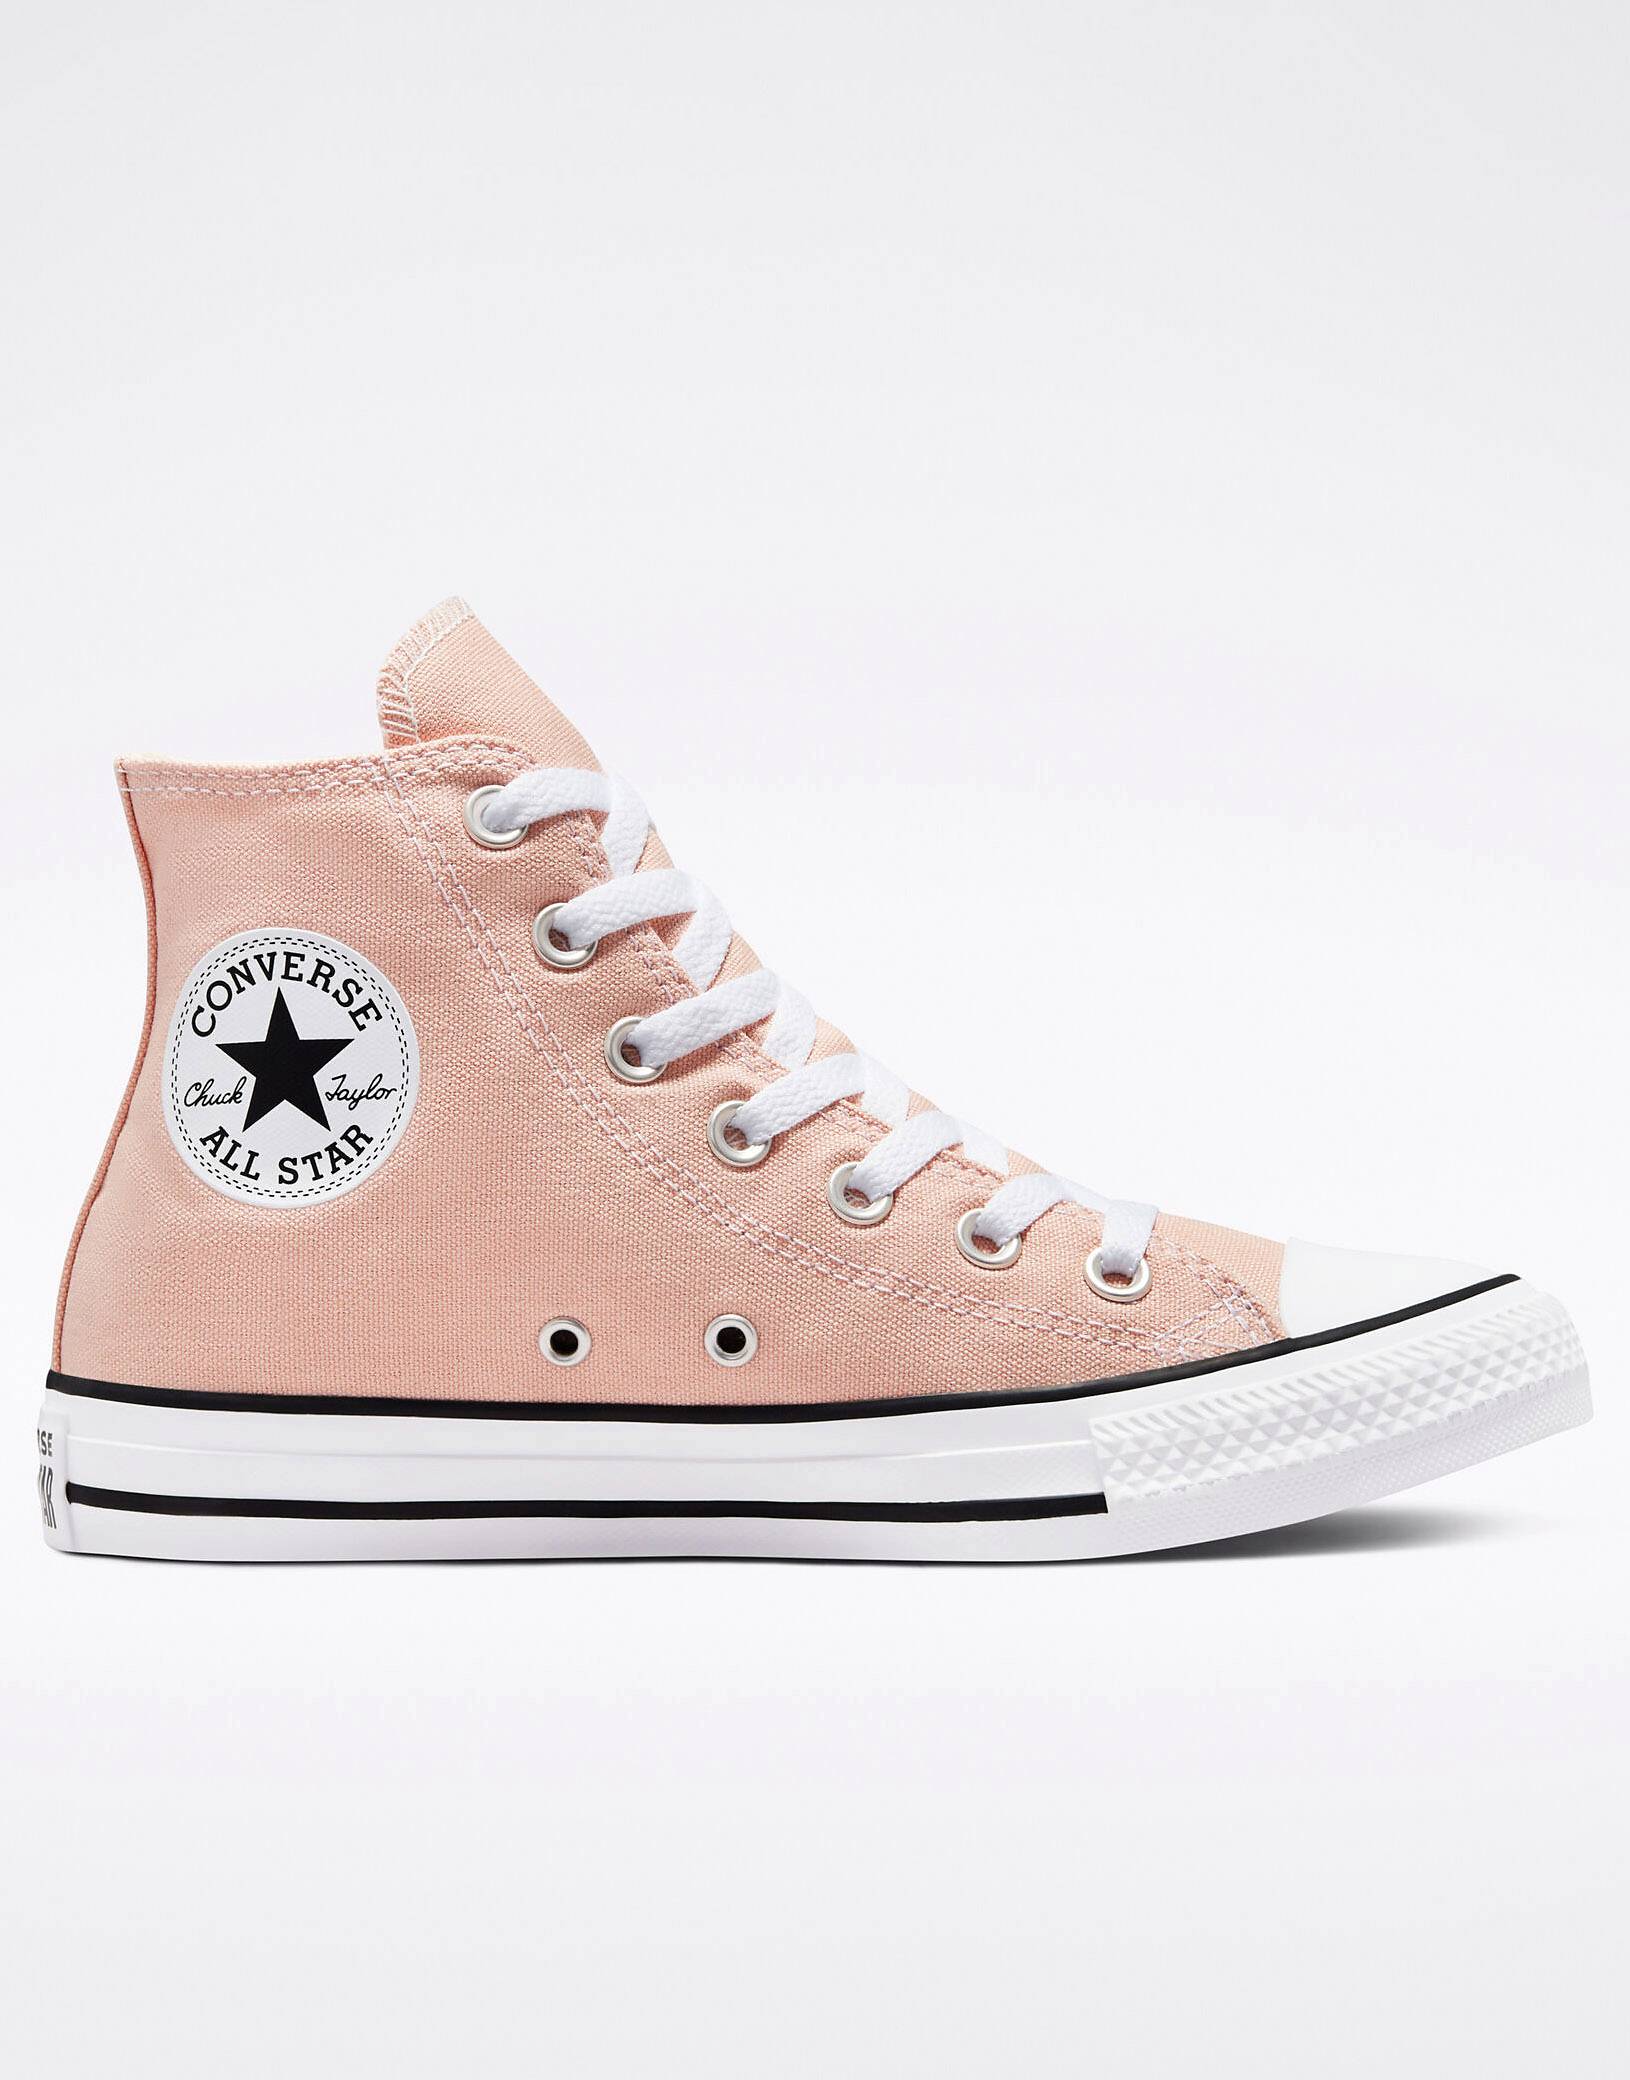 asos.com | Converse Chuck Taylor All Star Hi sneakers in pink clay